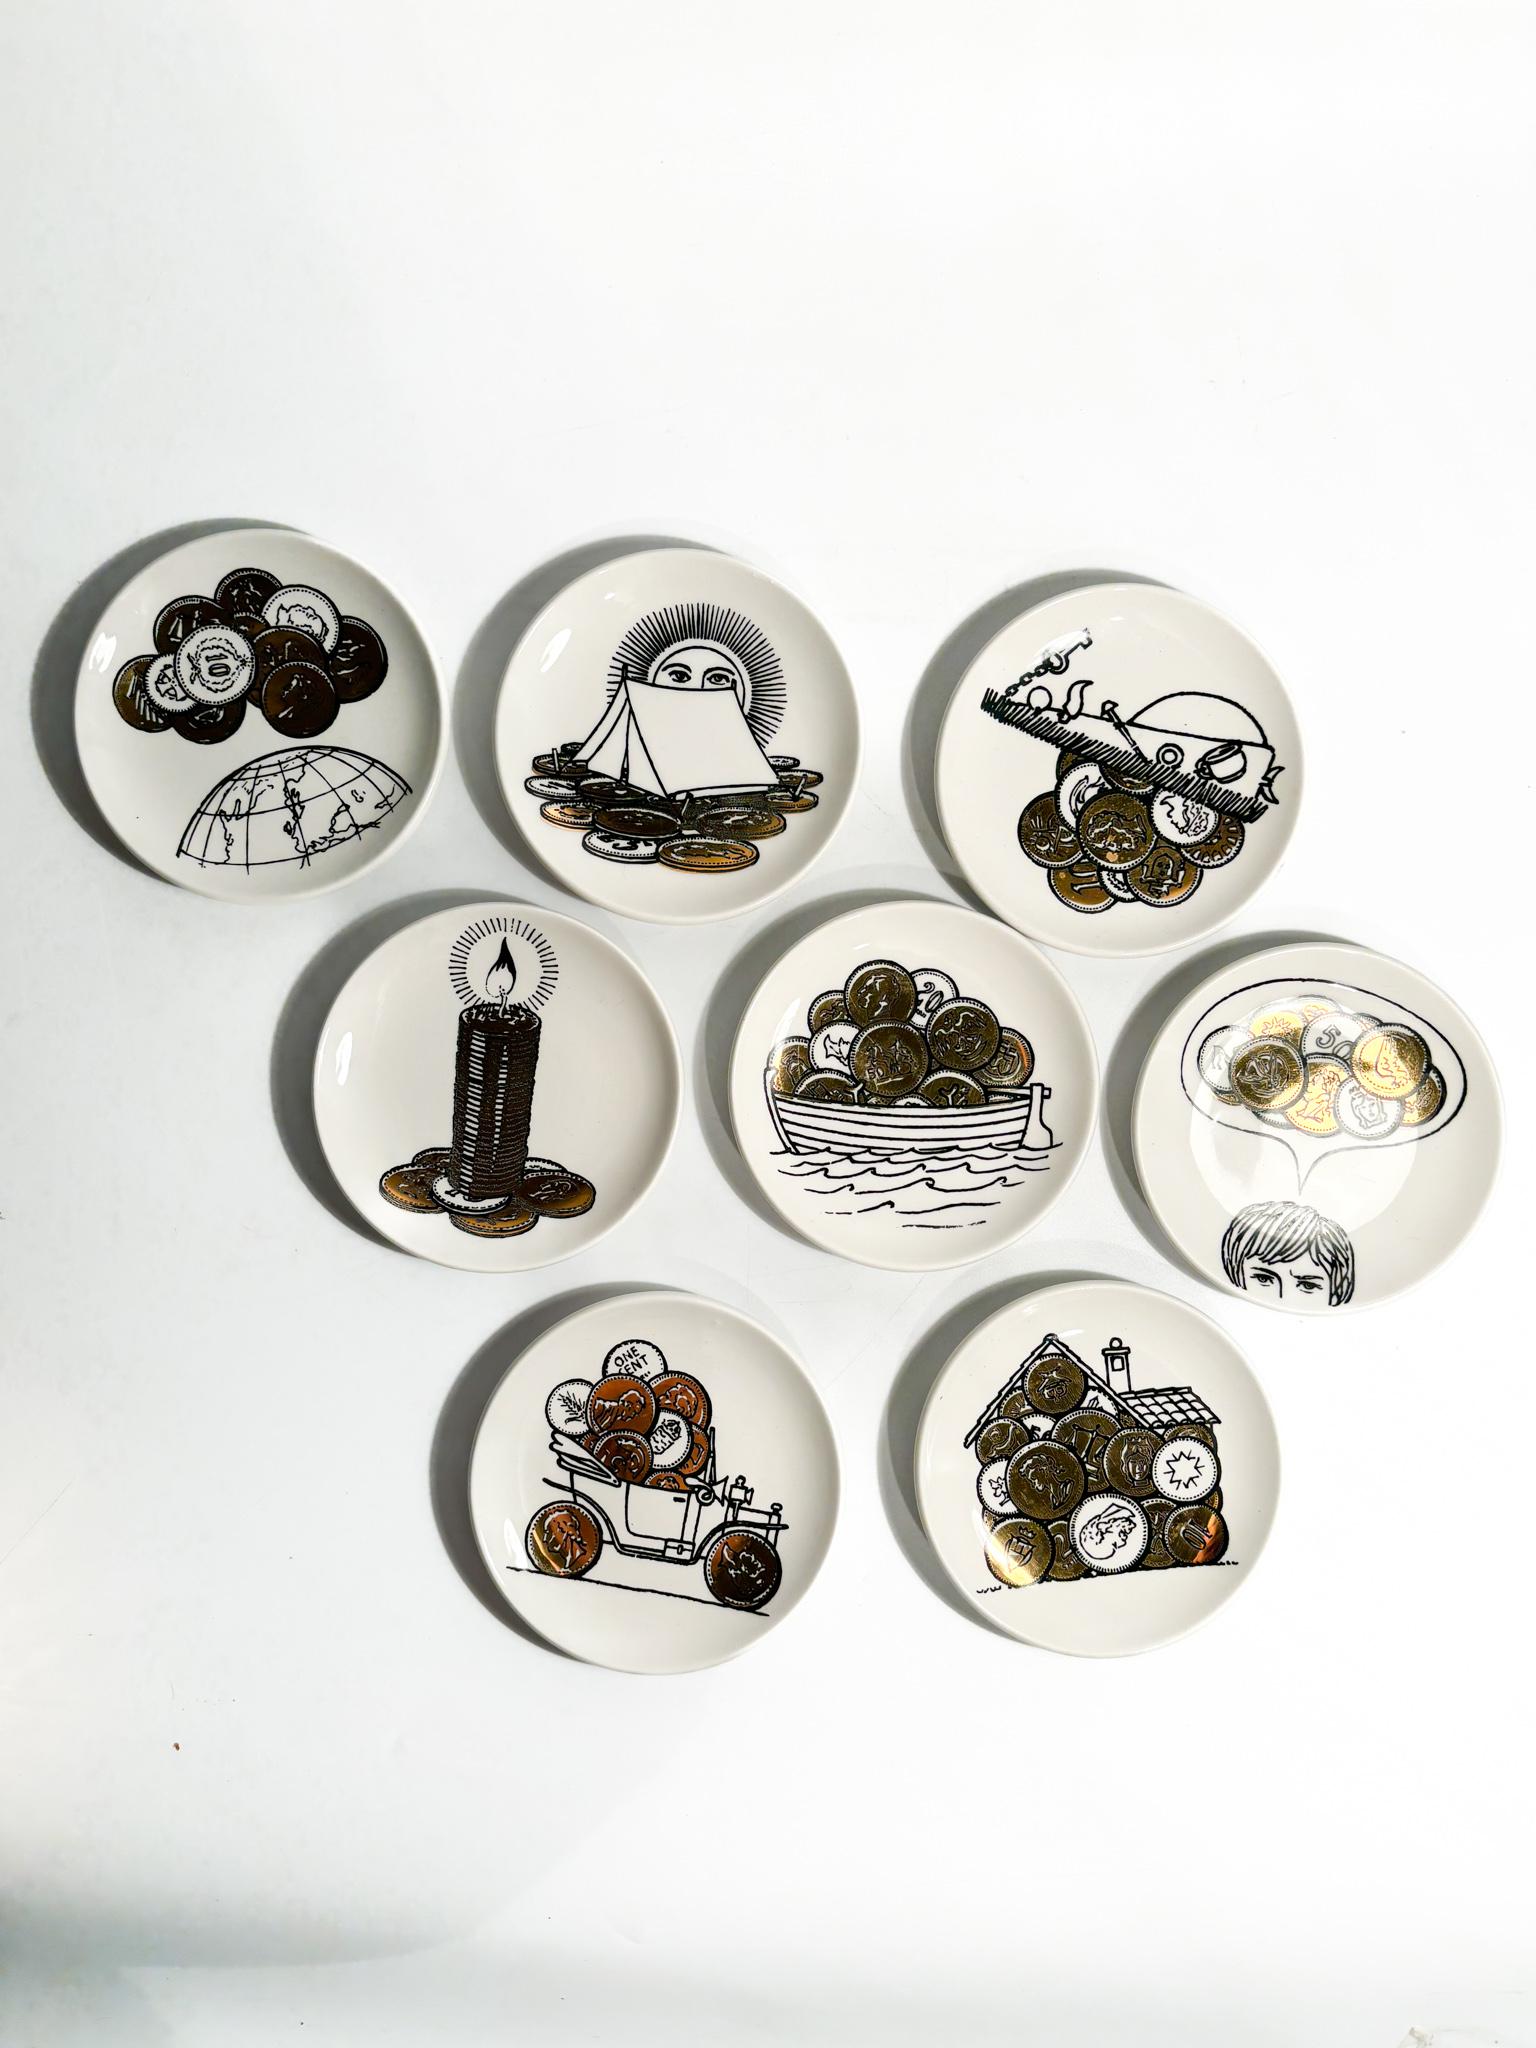 Set of 8 coasters by Fornasetti in silk-screened porcelain, with 